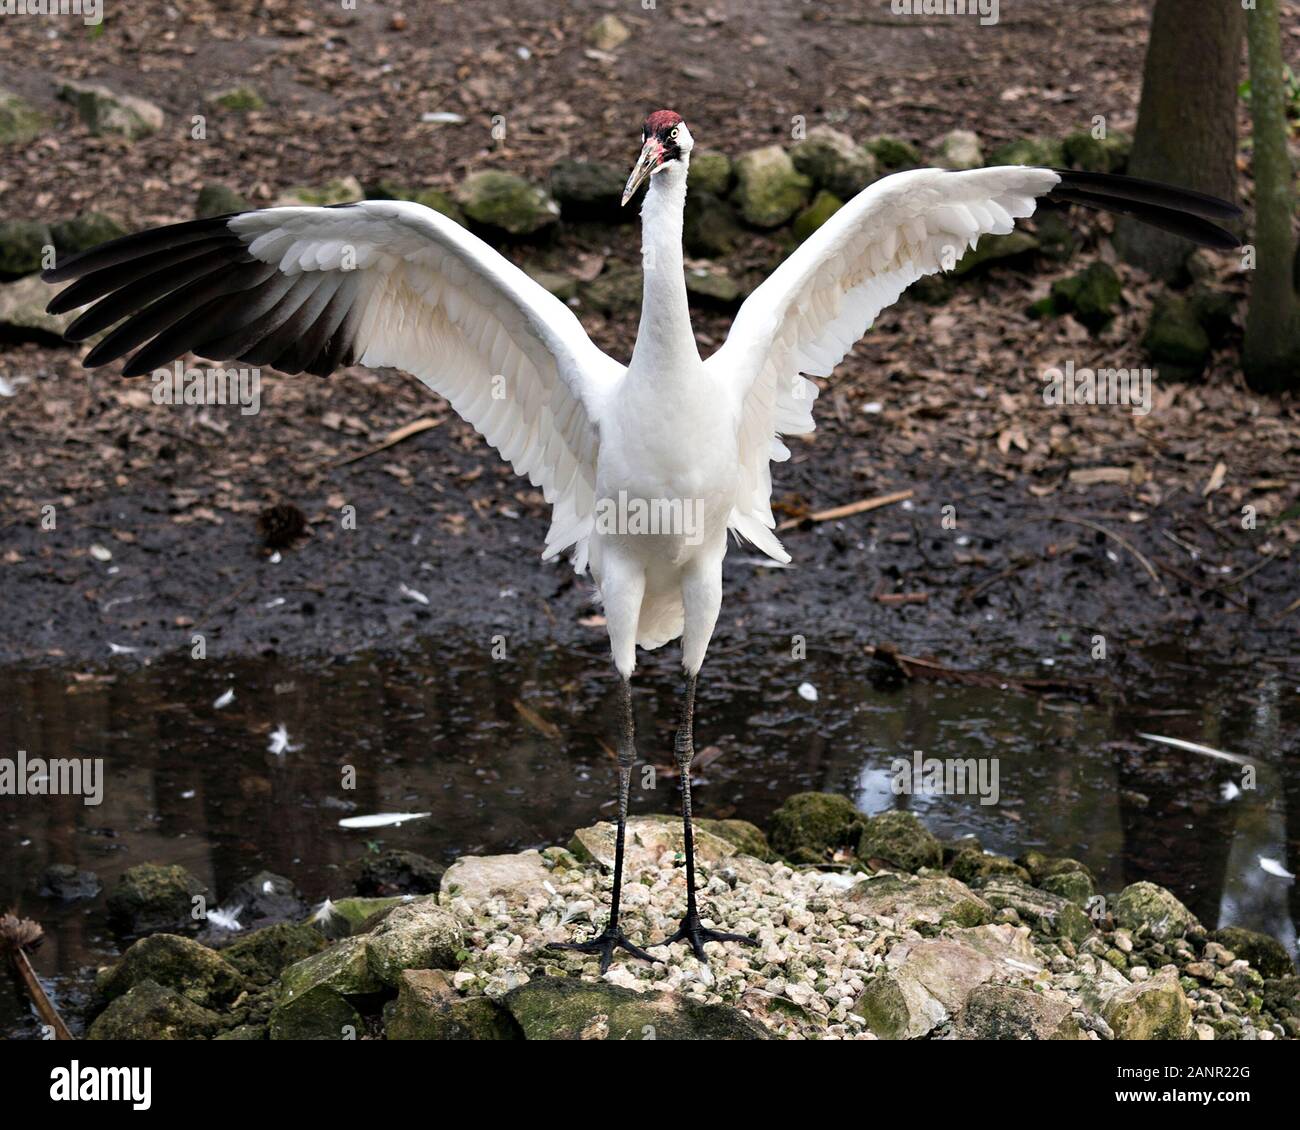 Whooping Crane image with its spread wings standing on a rock by the water in its environment and surrounding. Endangered species. Stock Photo